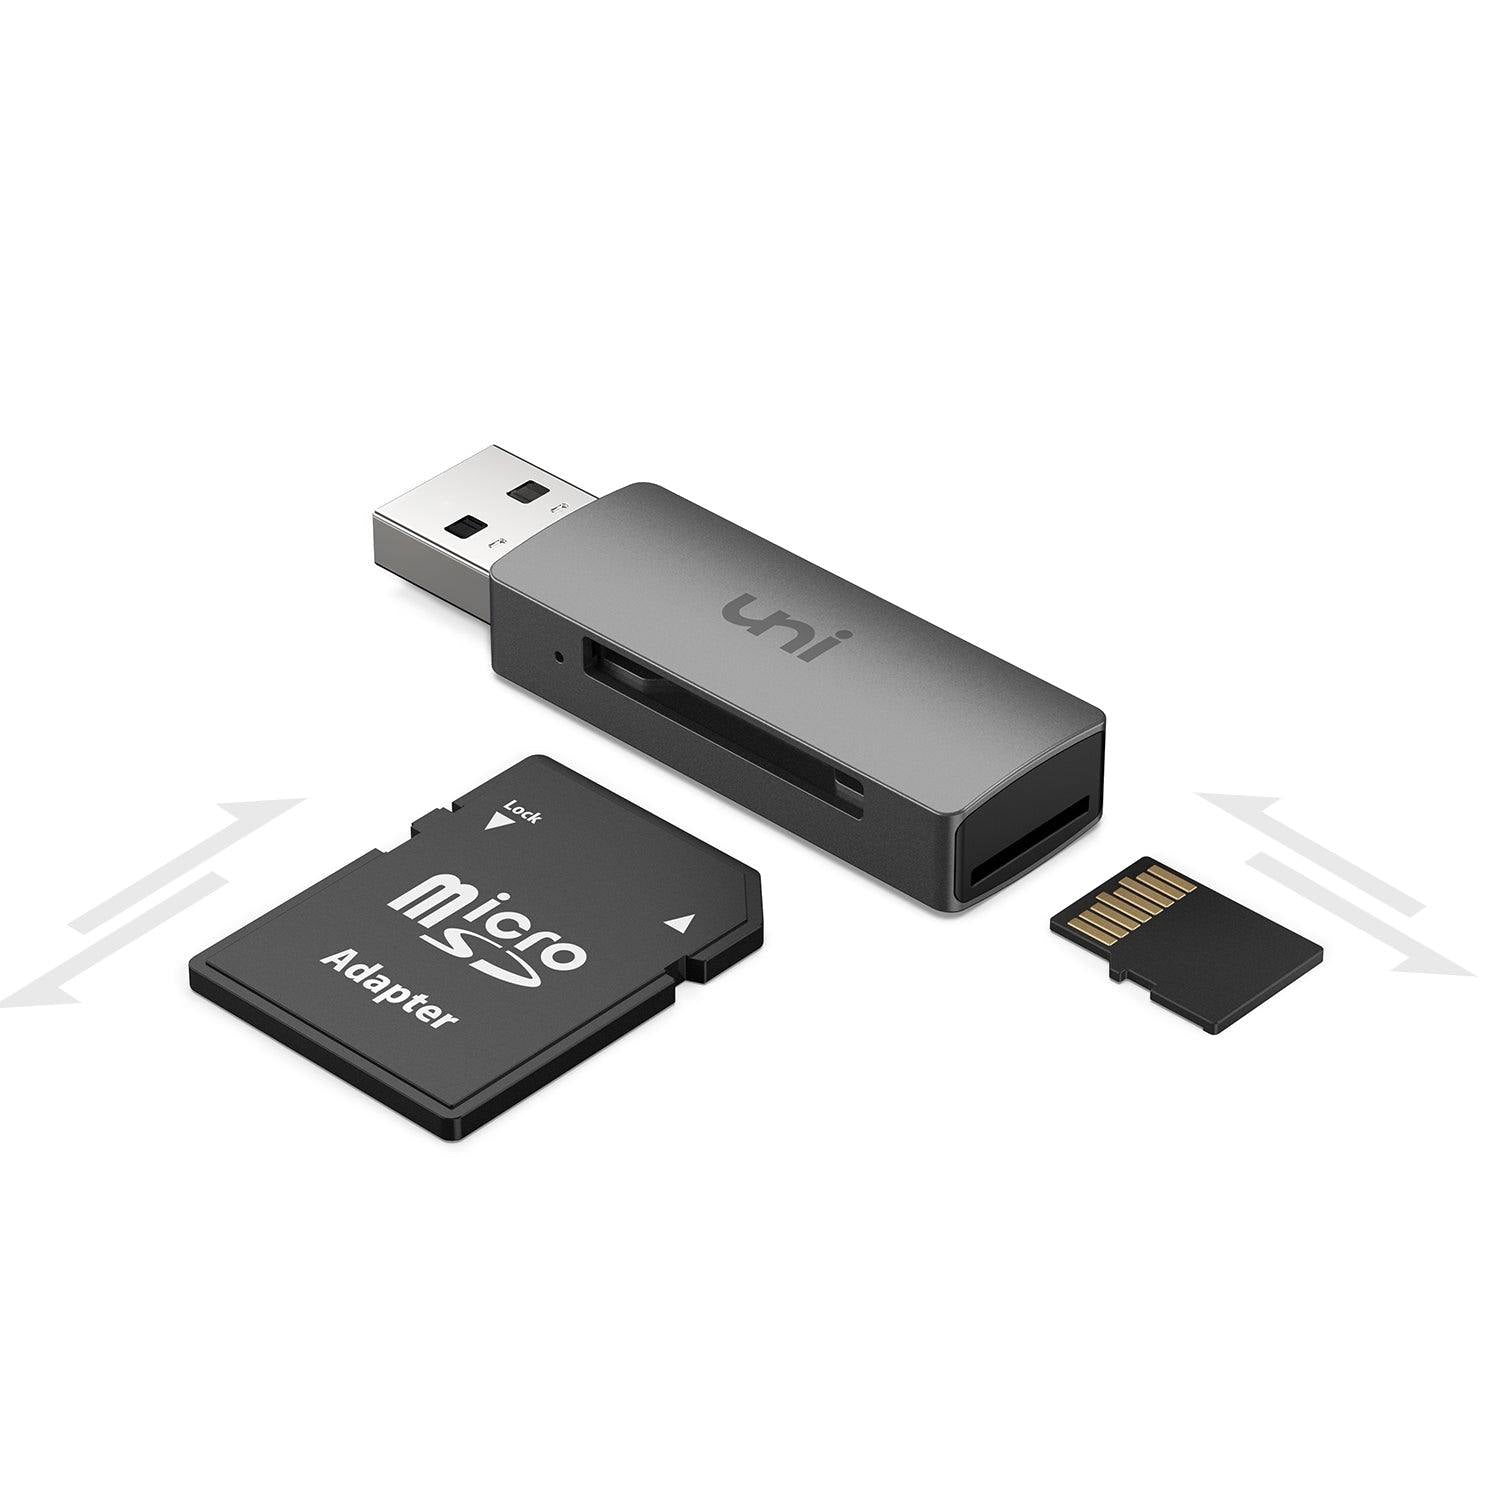 gevogelte oorsprong Zuidelijk uni® Card Reader, USB 3.0 to SD Card / Micro SD / TF Card Adapter